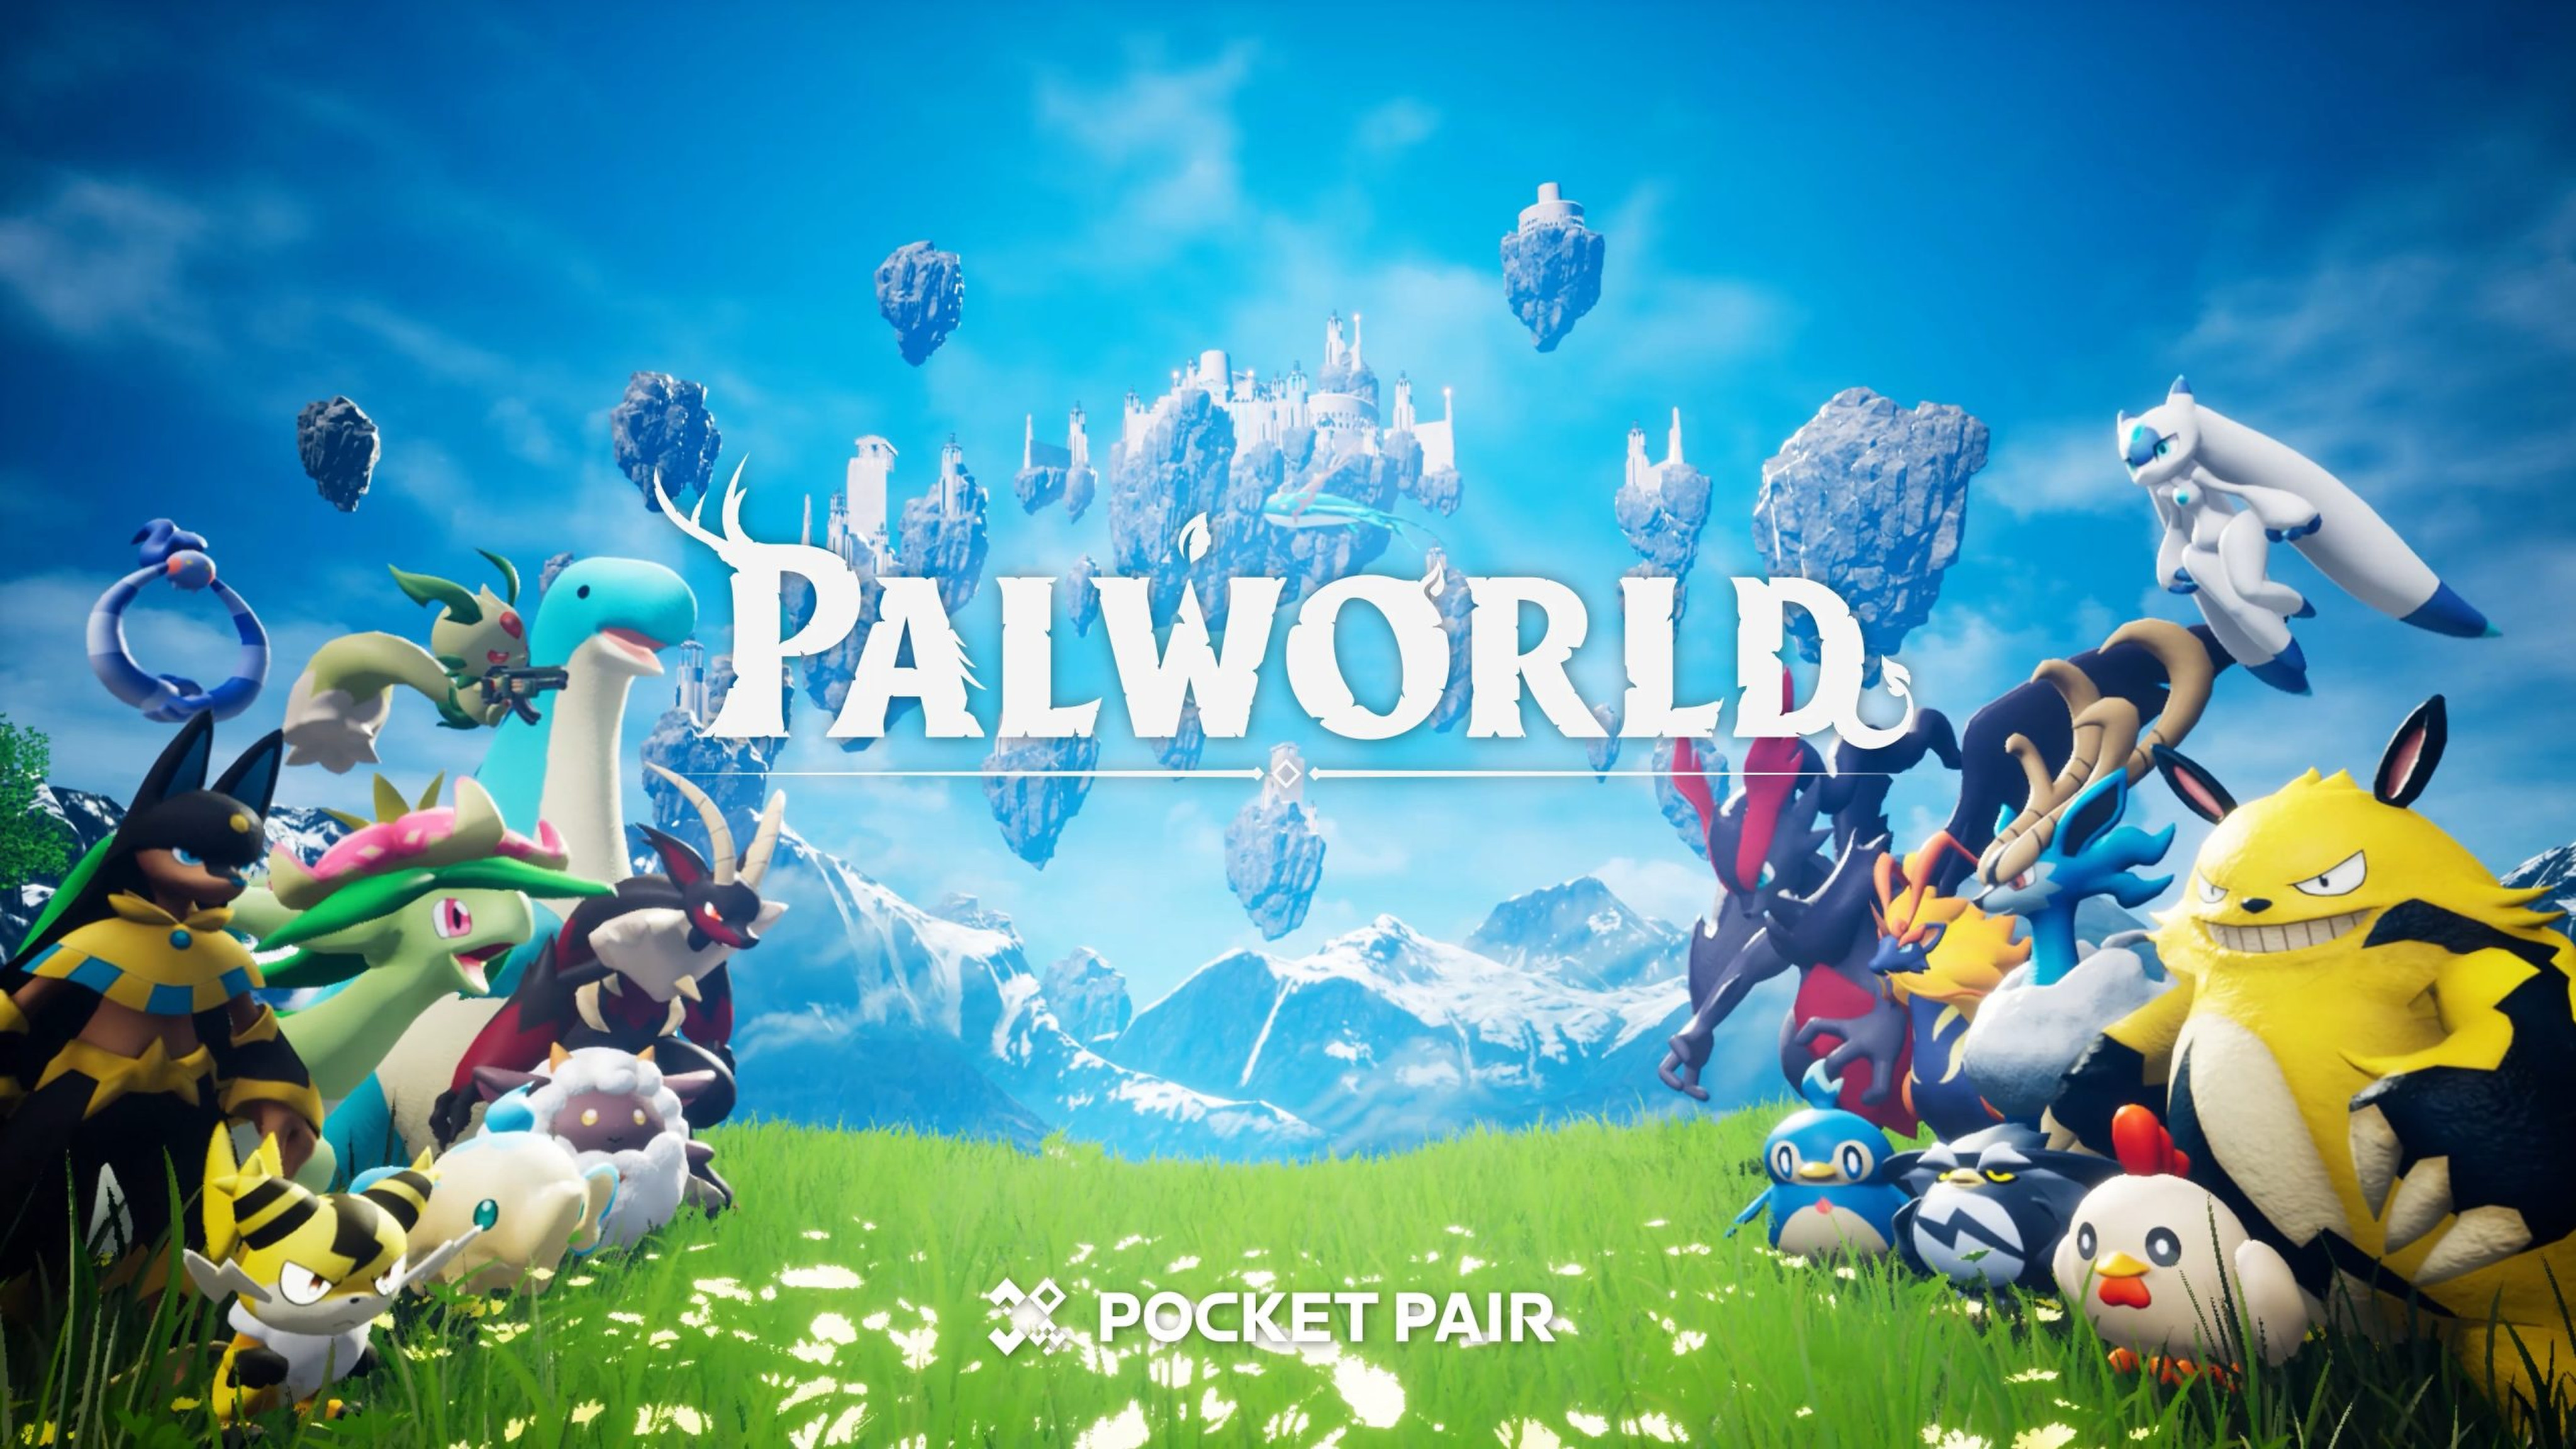 Palworld is an action-adventure and monster-taming video game from Japanese developer Pocketpair. Photo: Handout